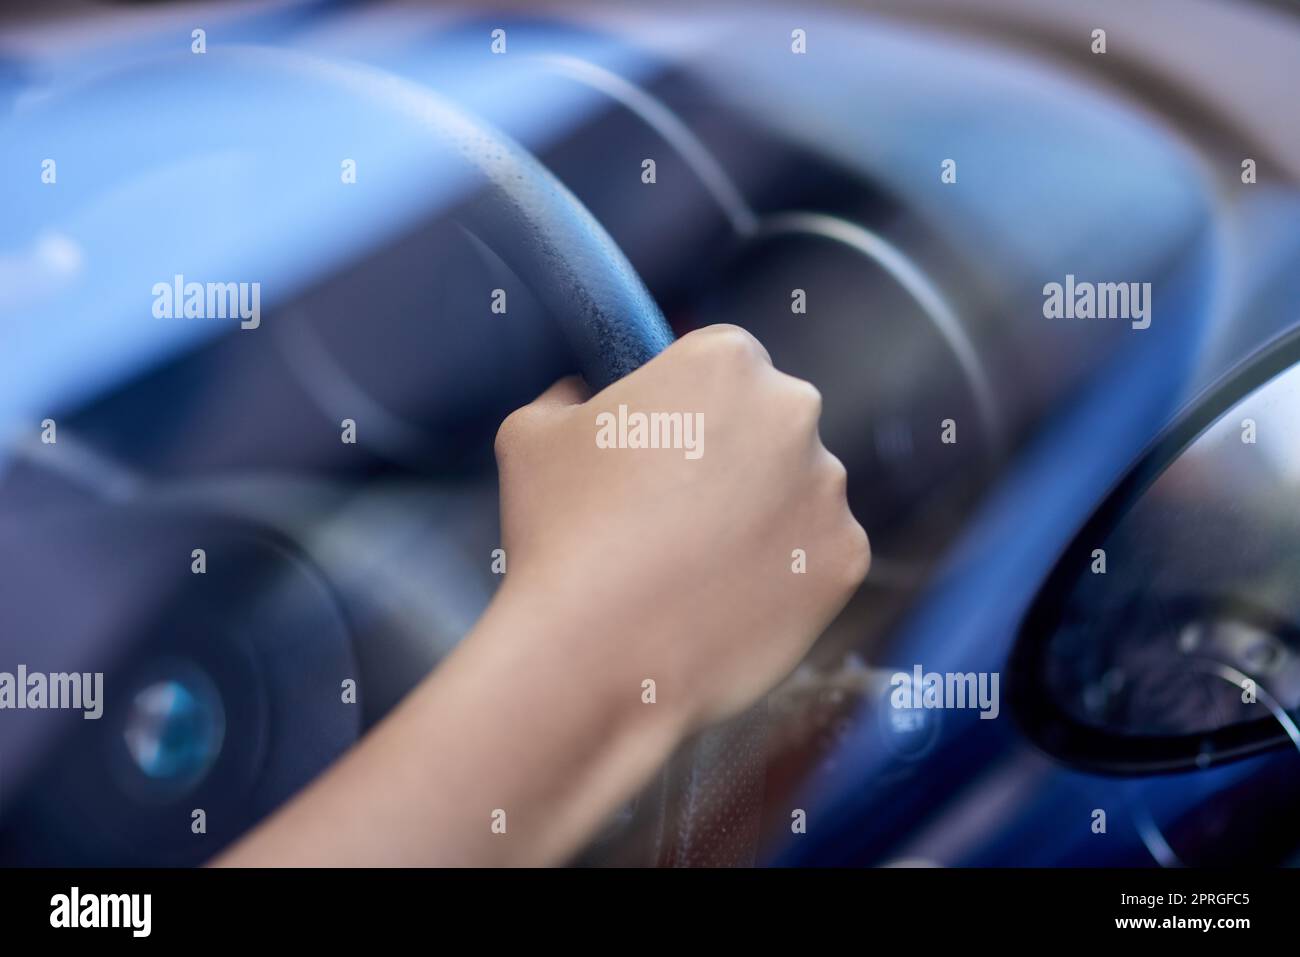 Hold on tight. hands holding onto a steering wheel while driving. Stock Photo